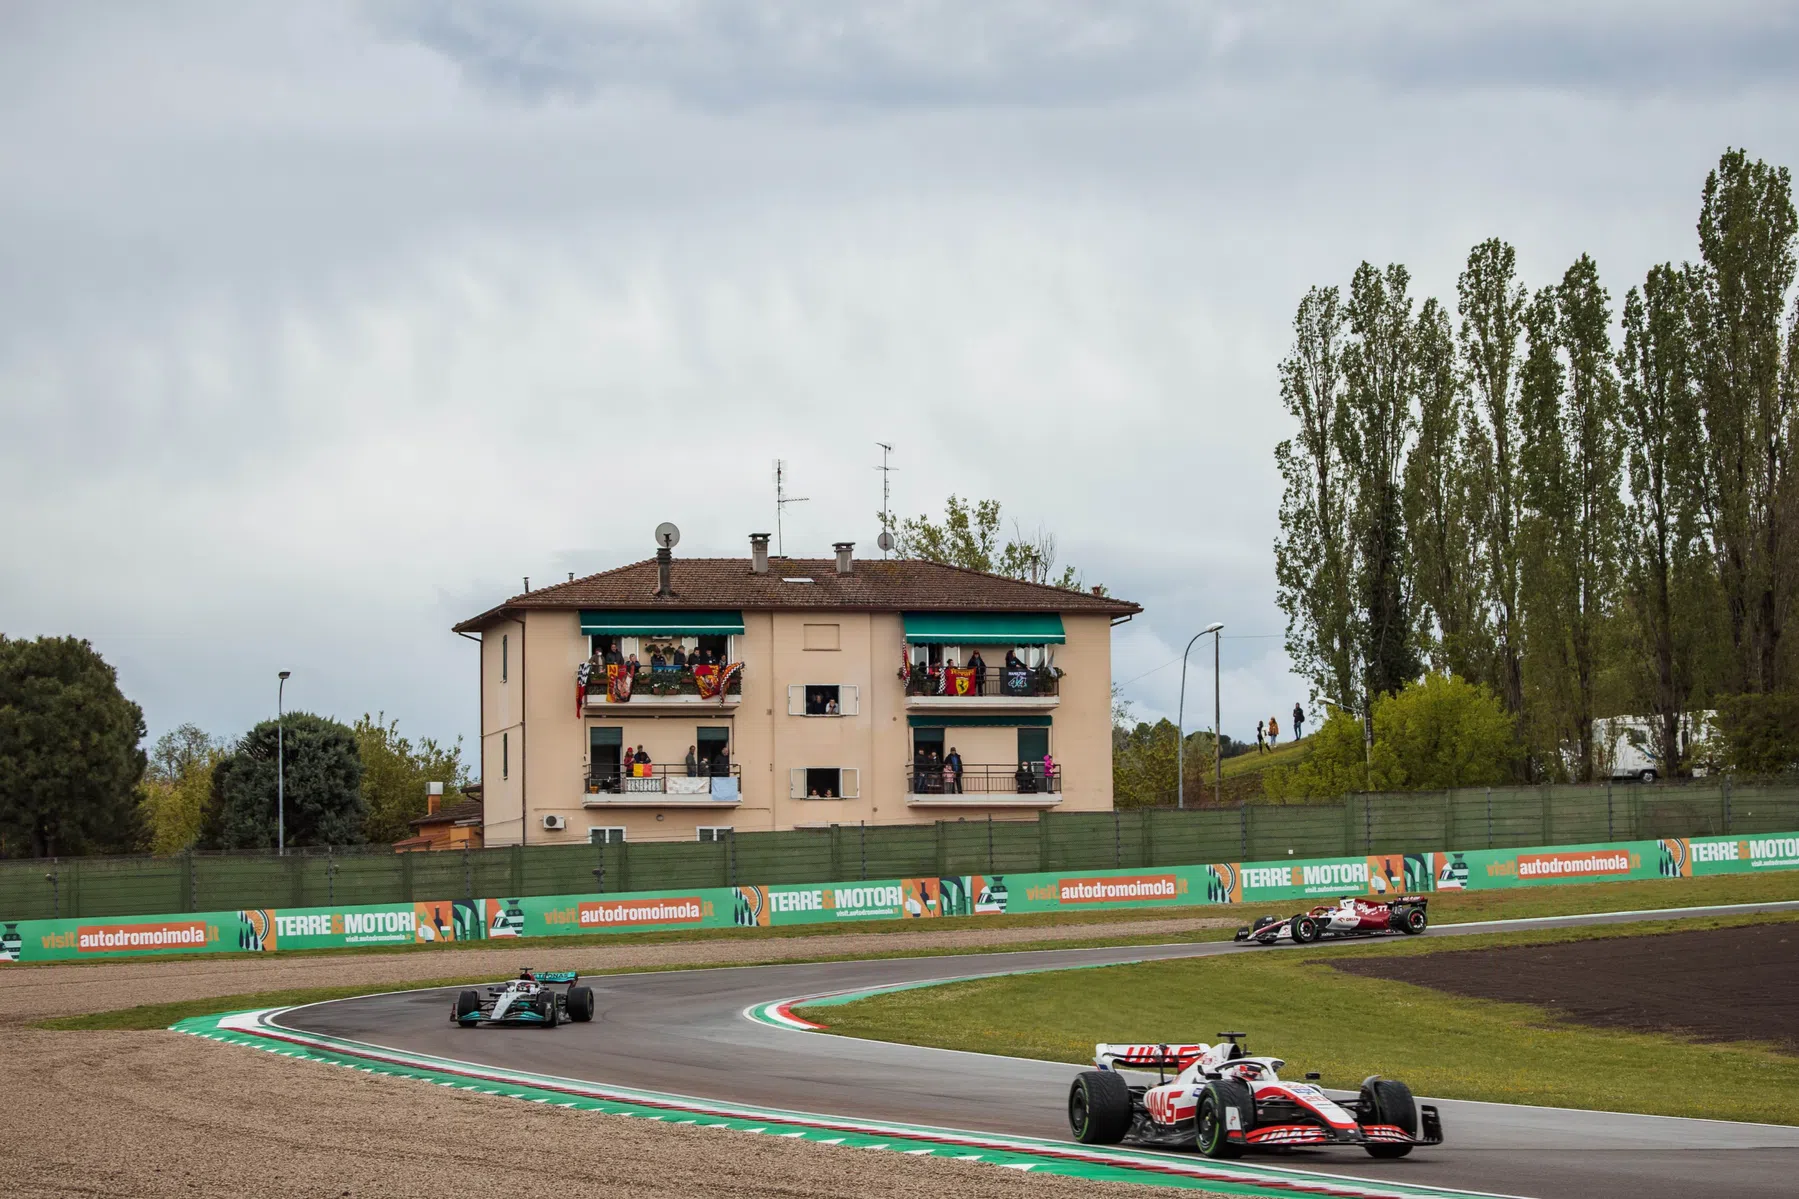 The weather forecast for the Imola Grand Prix